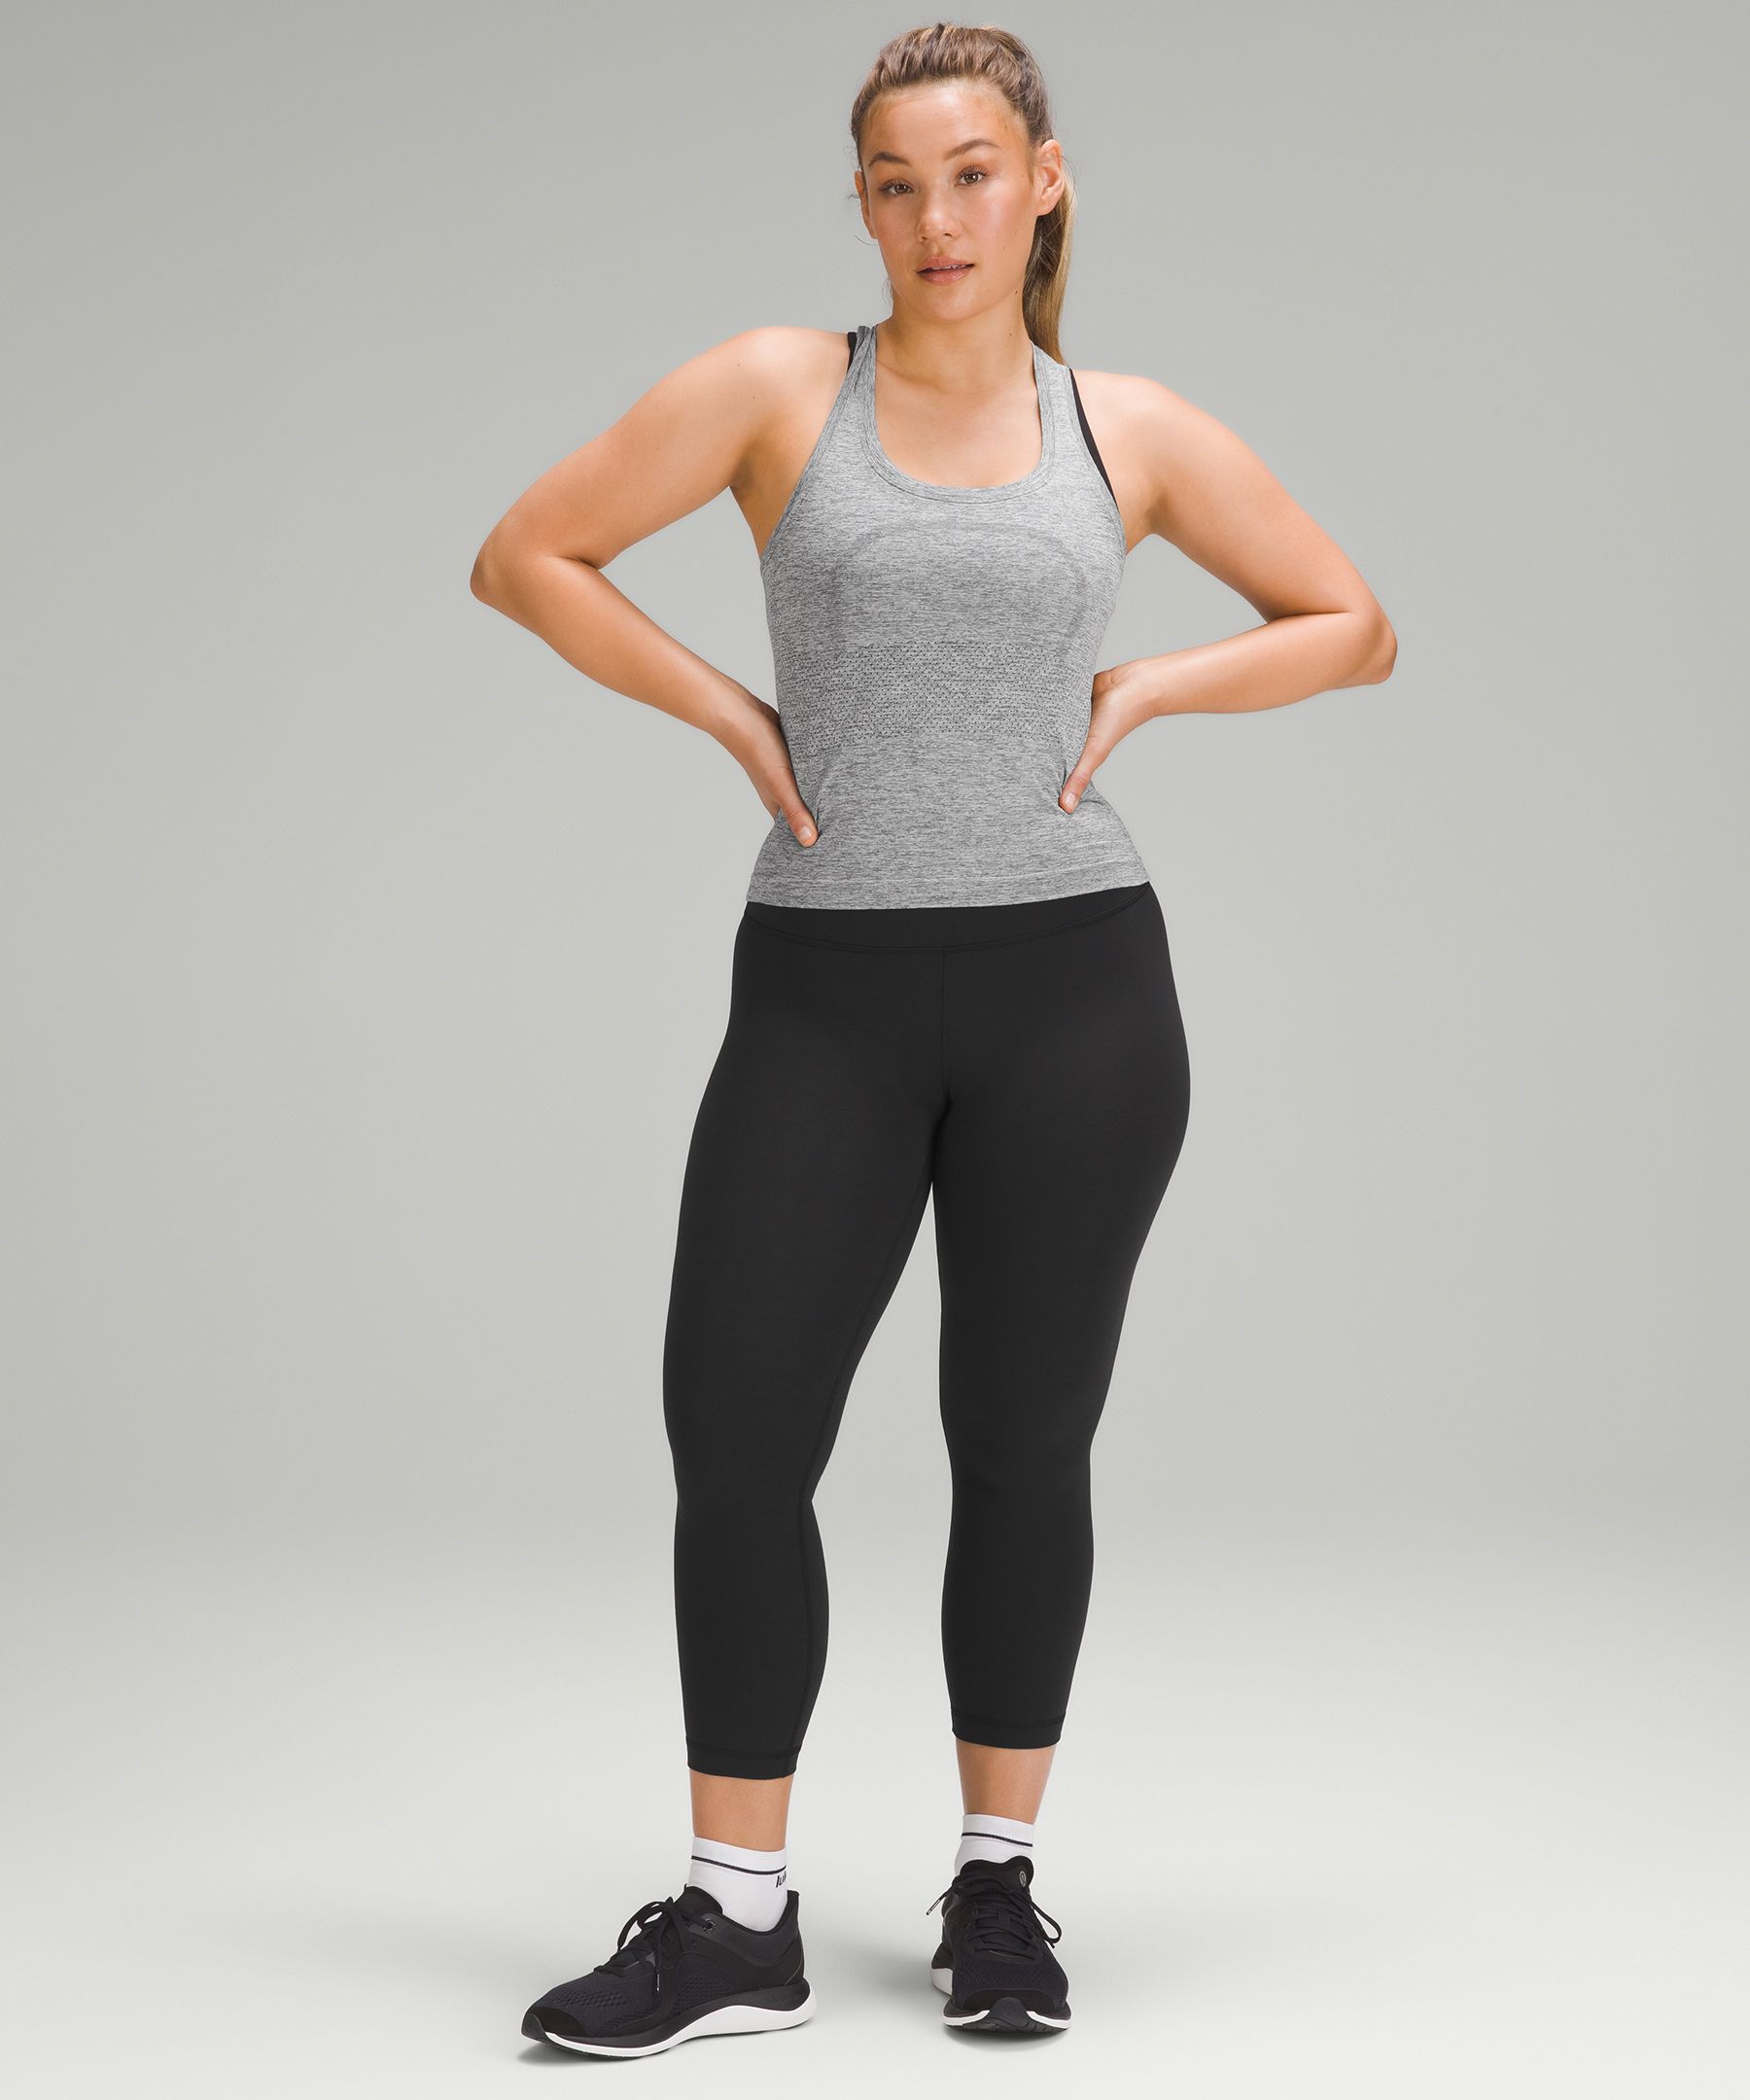 Lulu lifting fit (wunder train contour fit size 12 black, align tank size 14  heathered tidewater teal) : r/lululemon